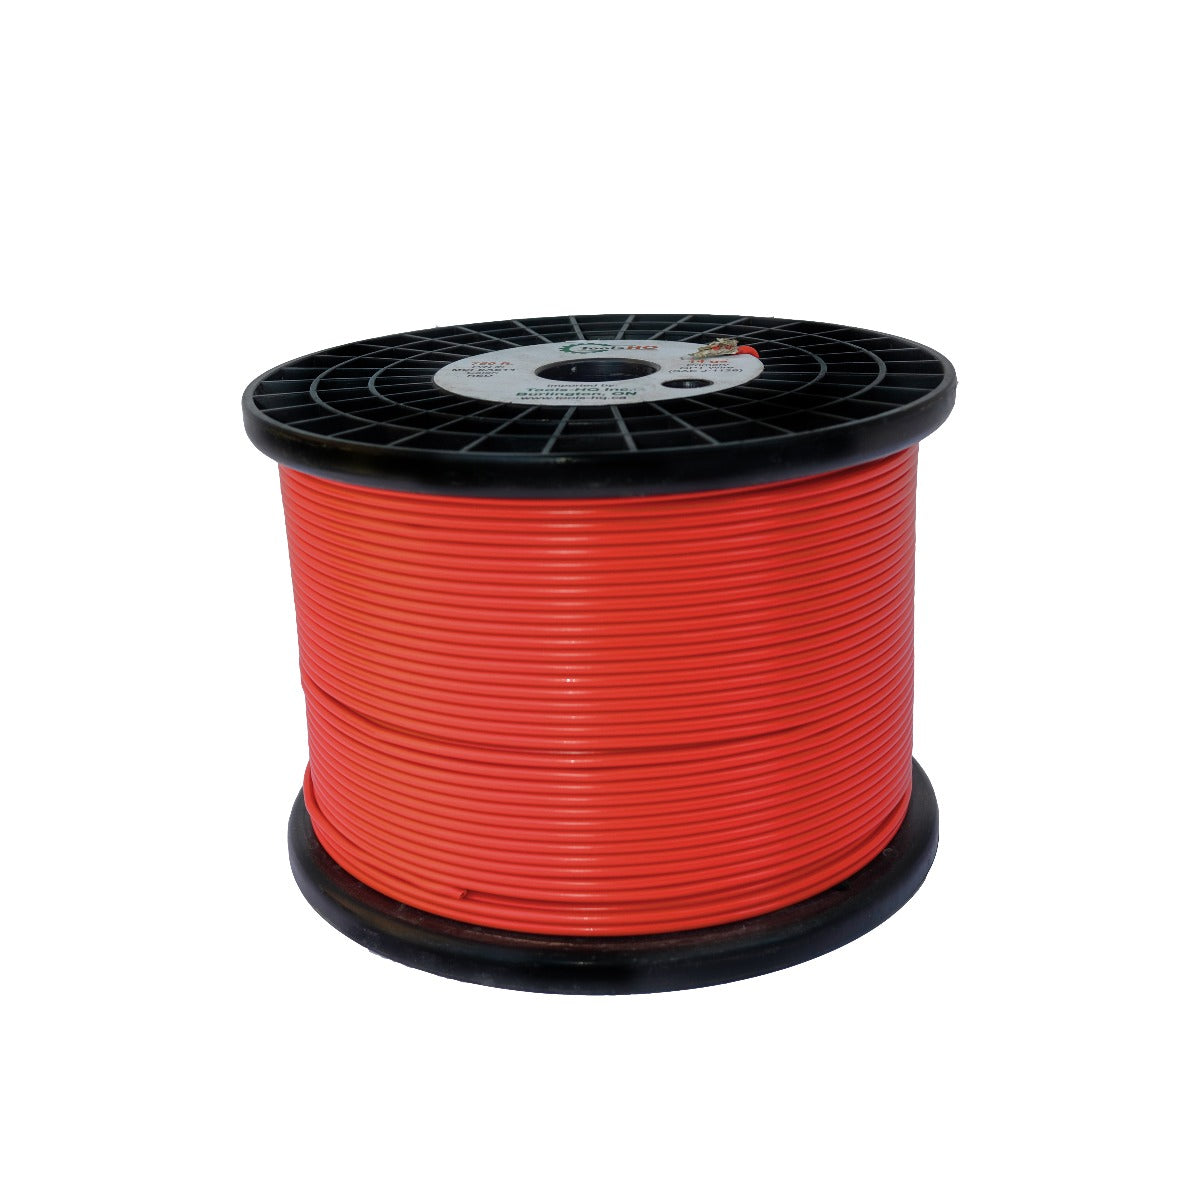 14 ga gpt electrical wire - 1000 ft reel